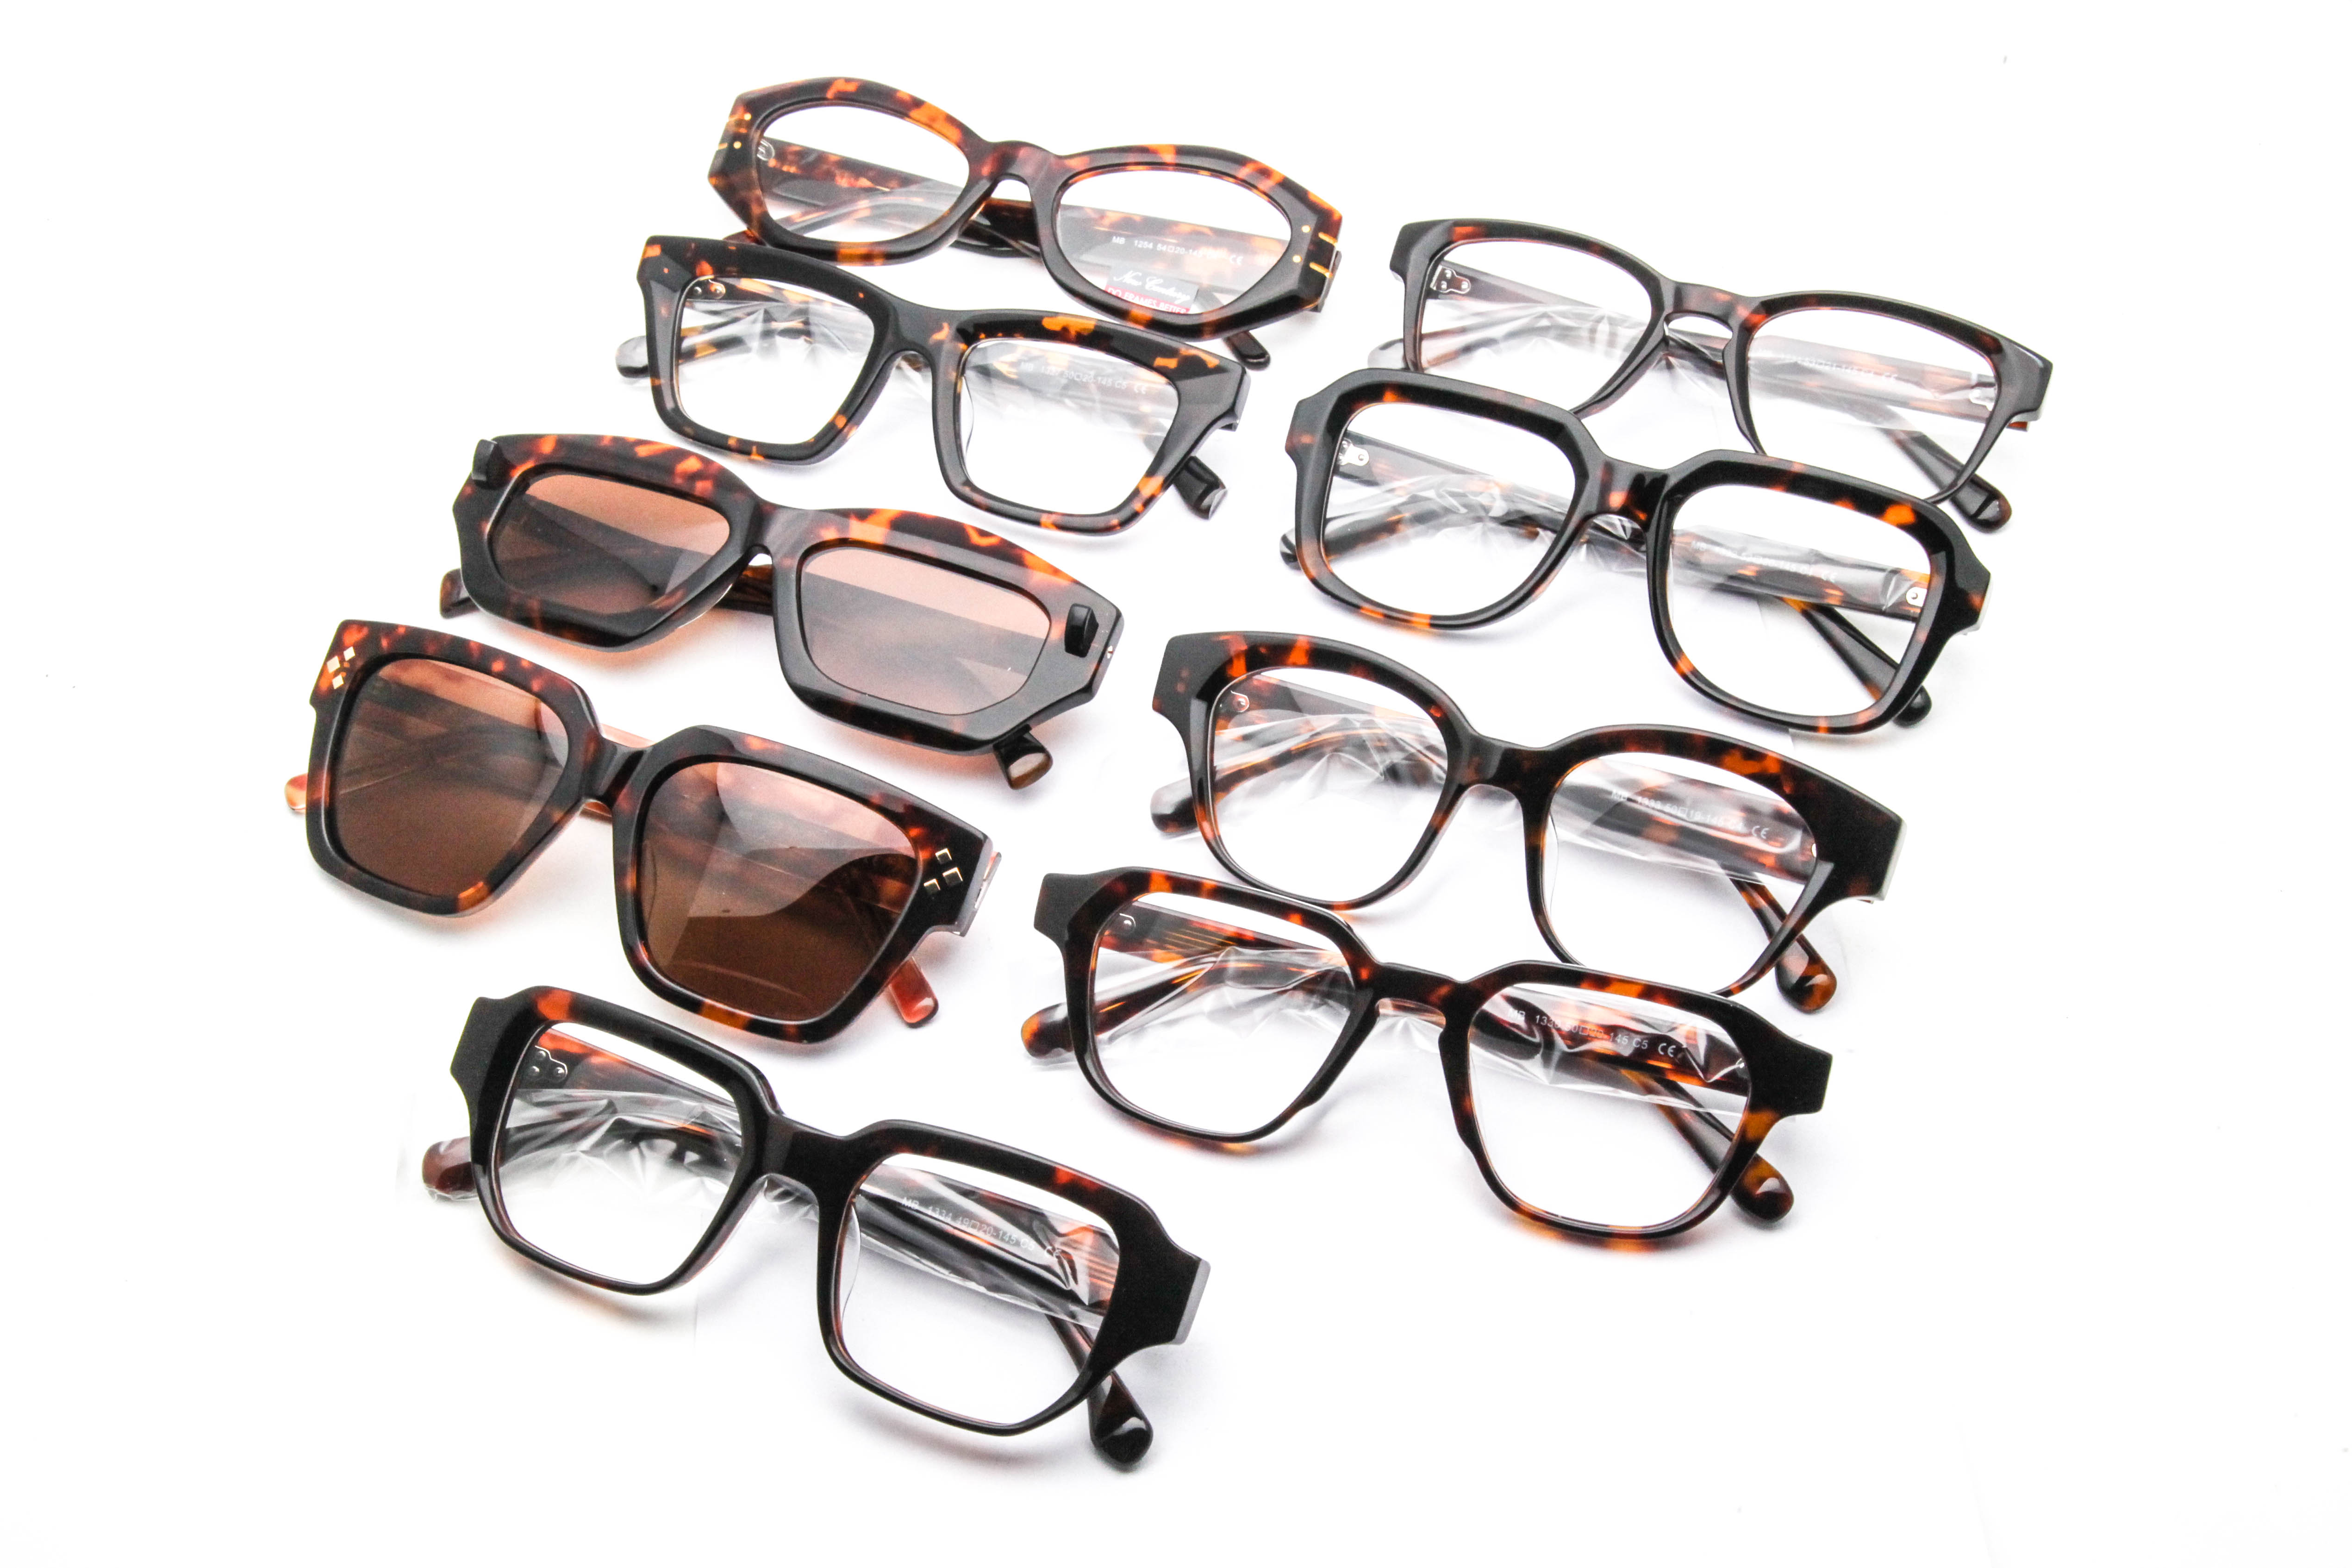 What is the difference between acetate and plastic eyeglass frames?